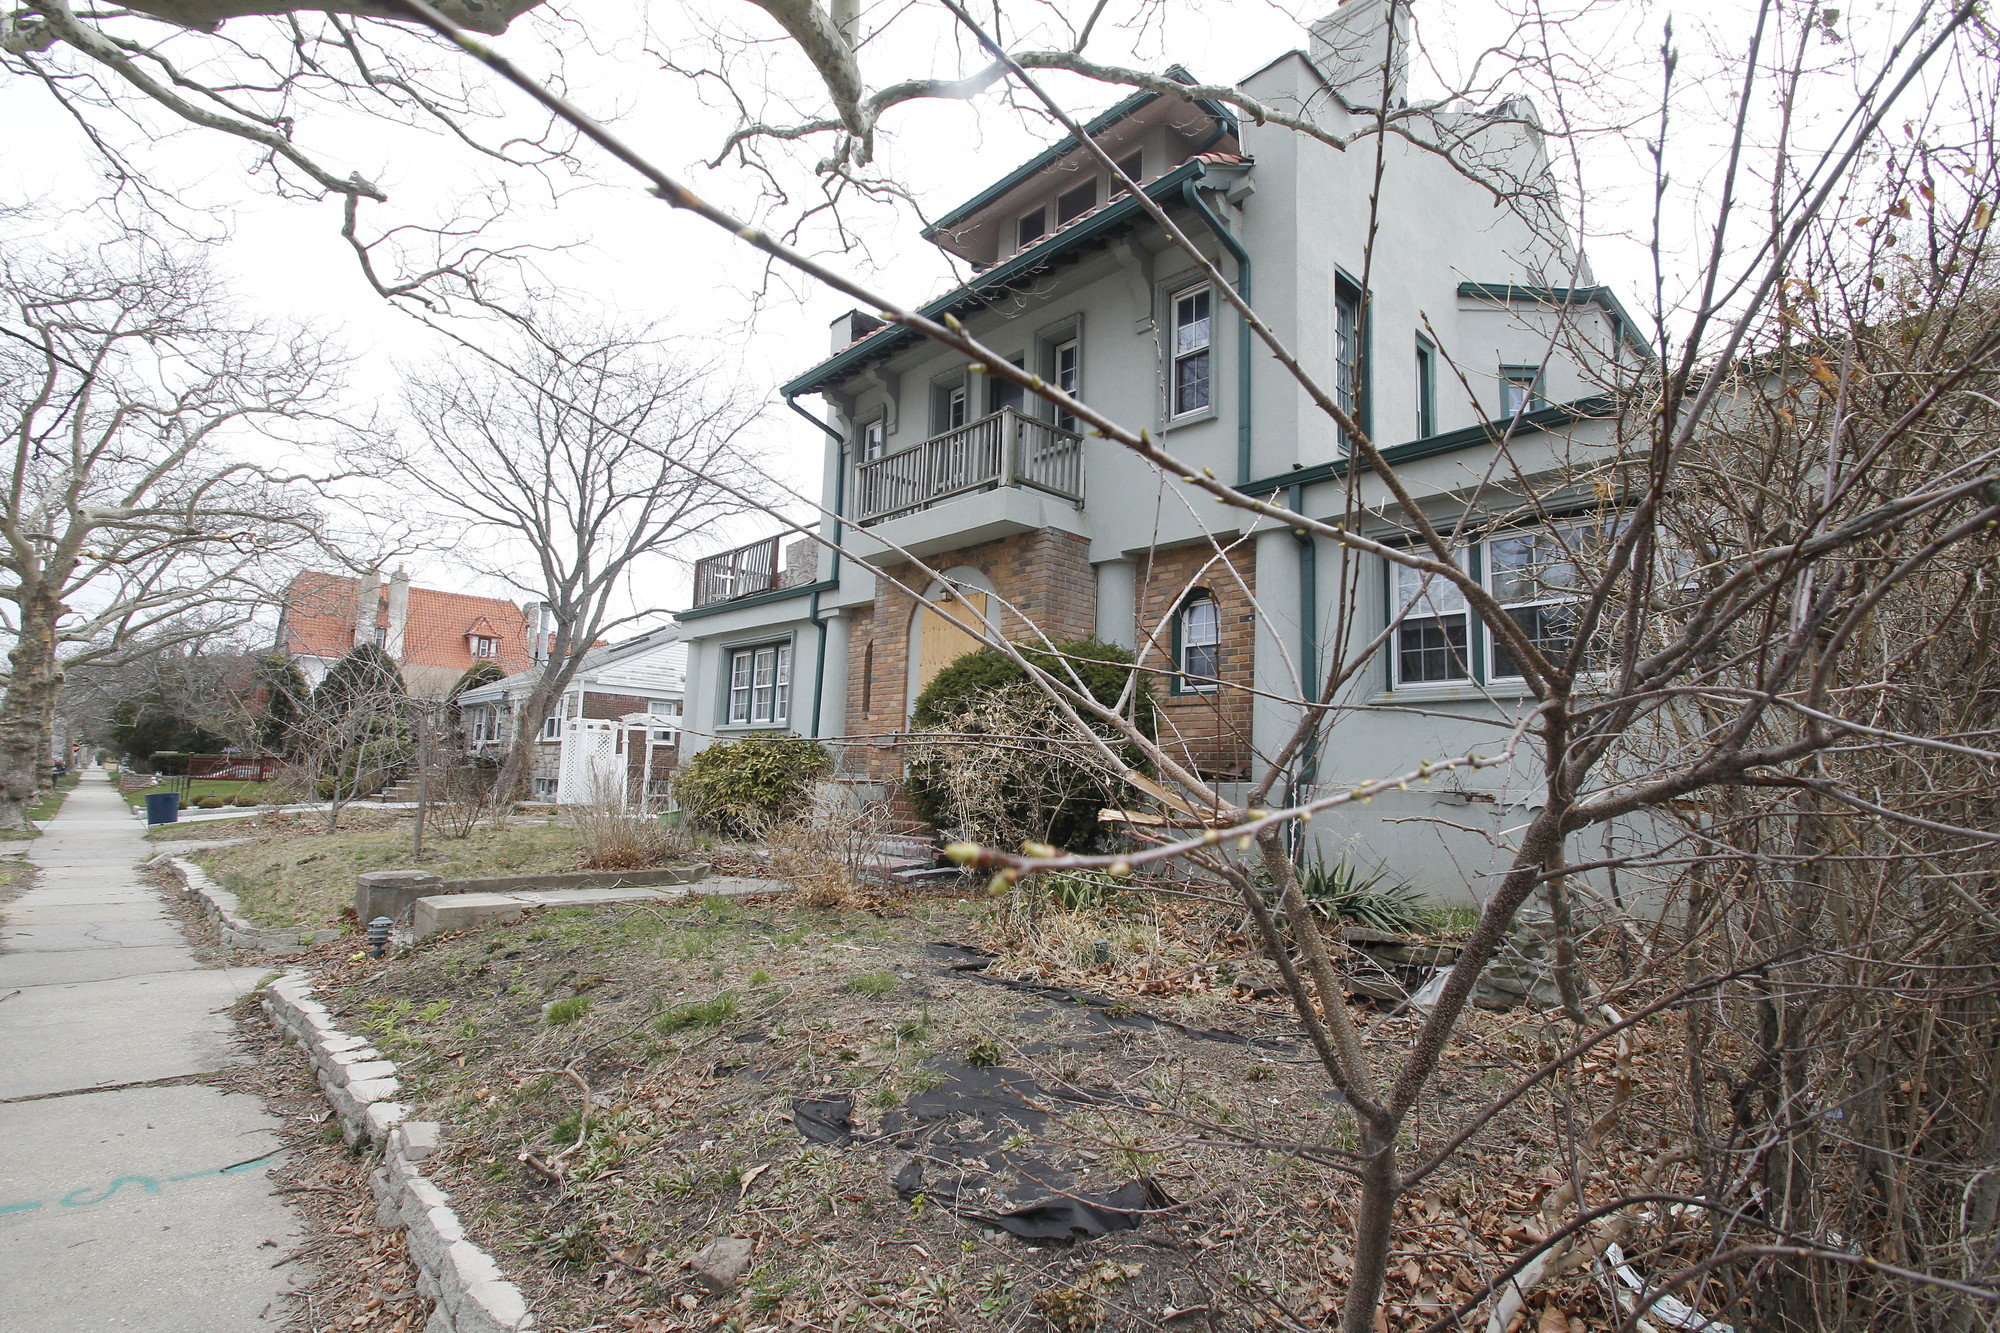 Ownership of this property has been up in the air since its elderly owner moved into a nursing home years ago and the foreclosure process stalled.